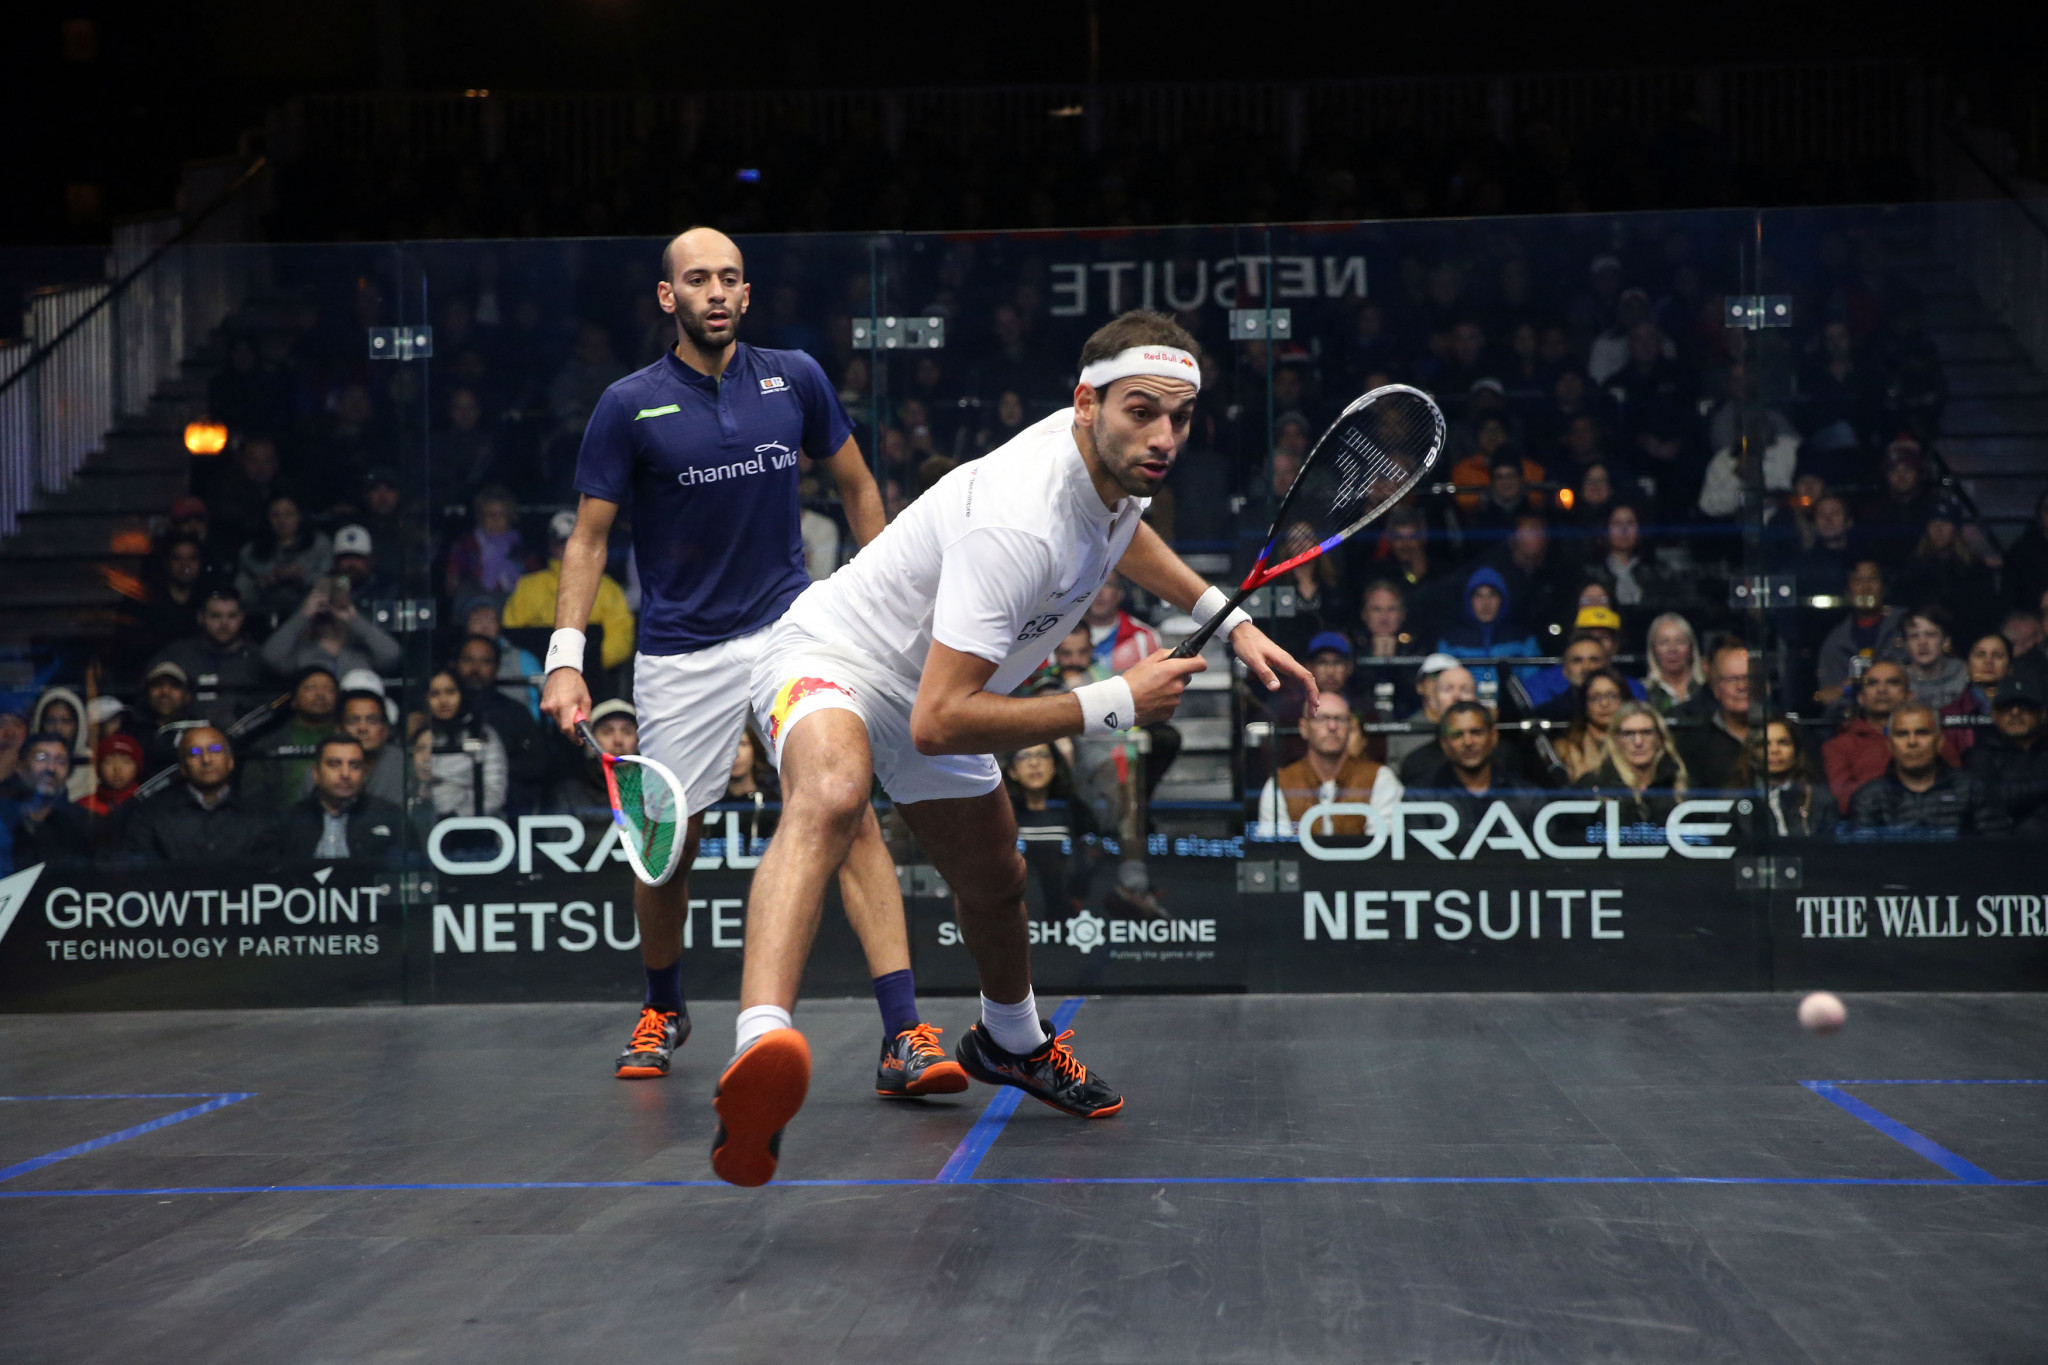 All-Egyptian finals booked at PSA Oracle Netsuite Open